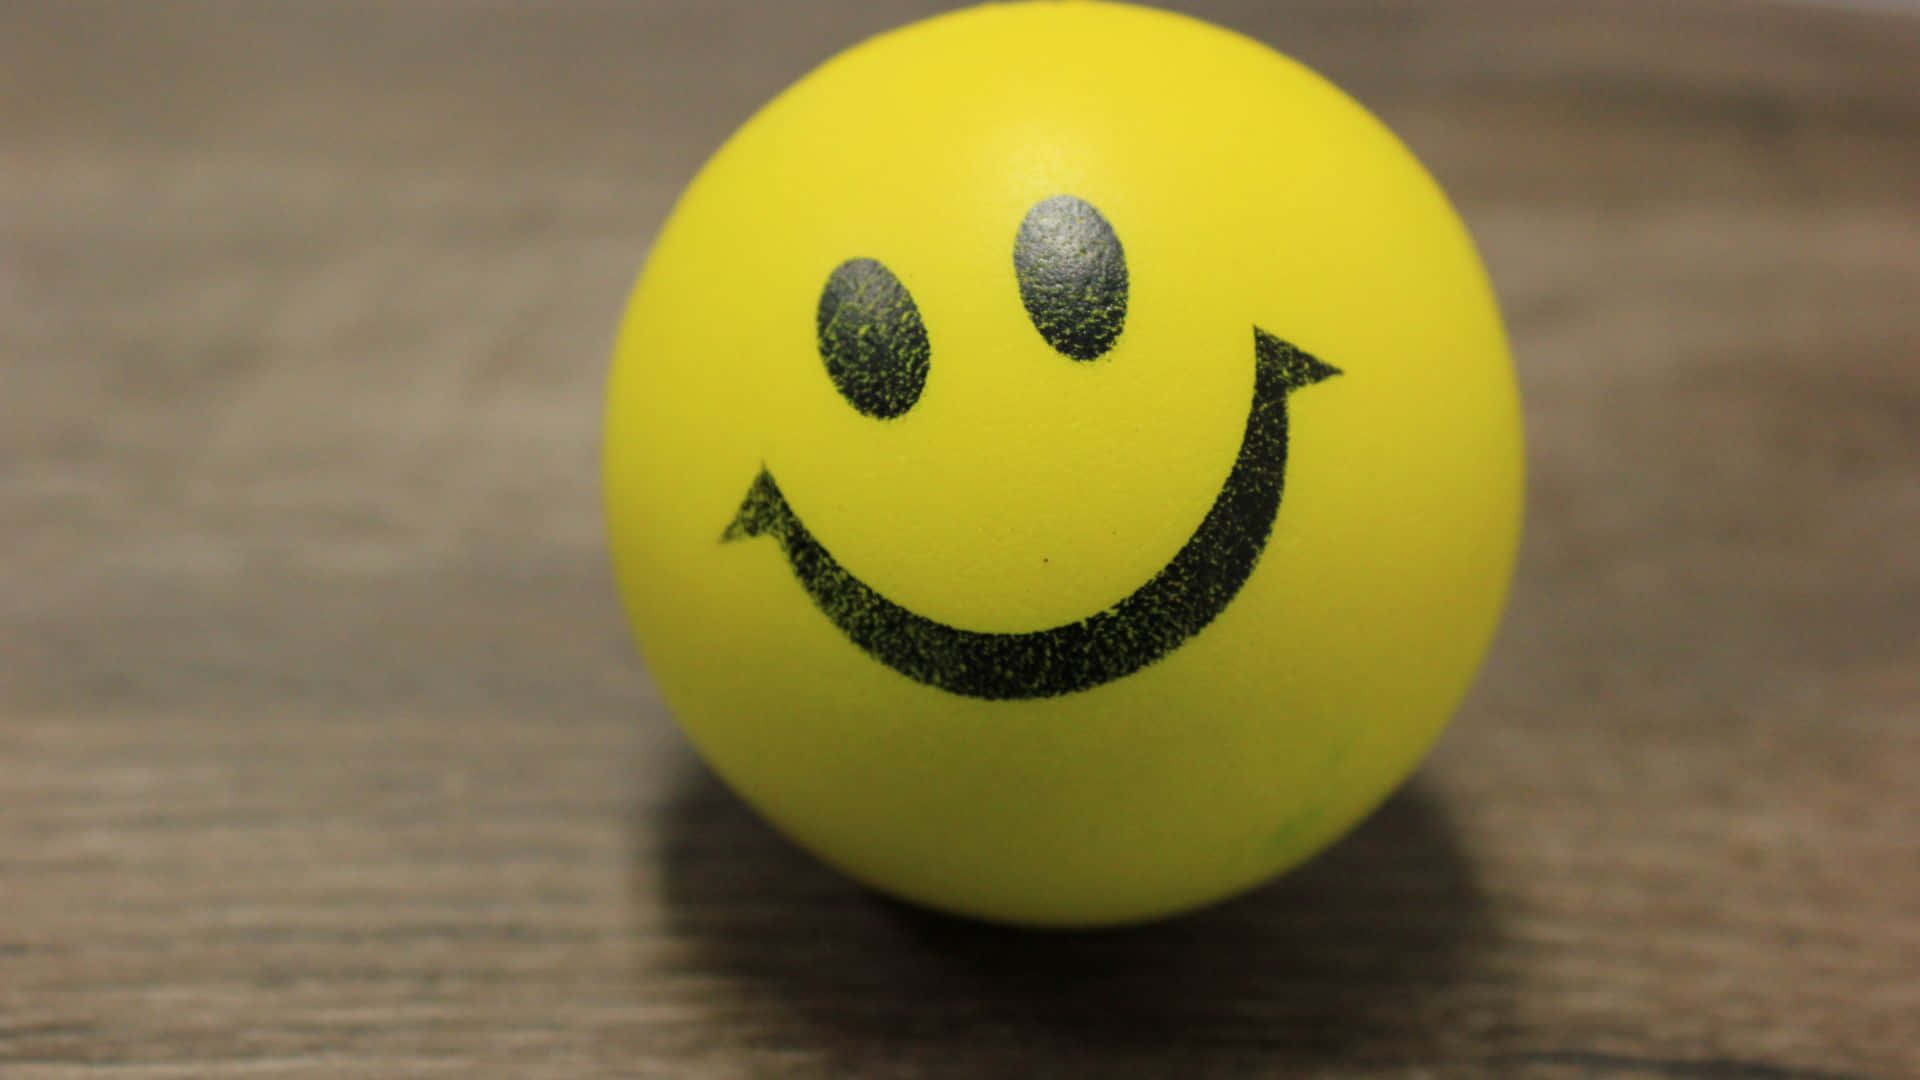 A cheerful smiley-face background enhancing positivity